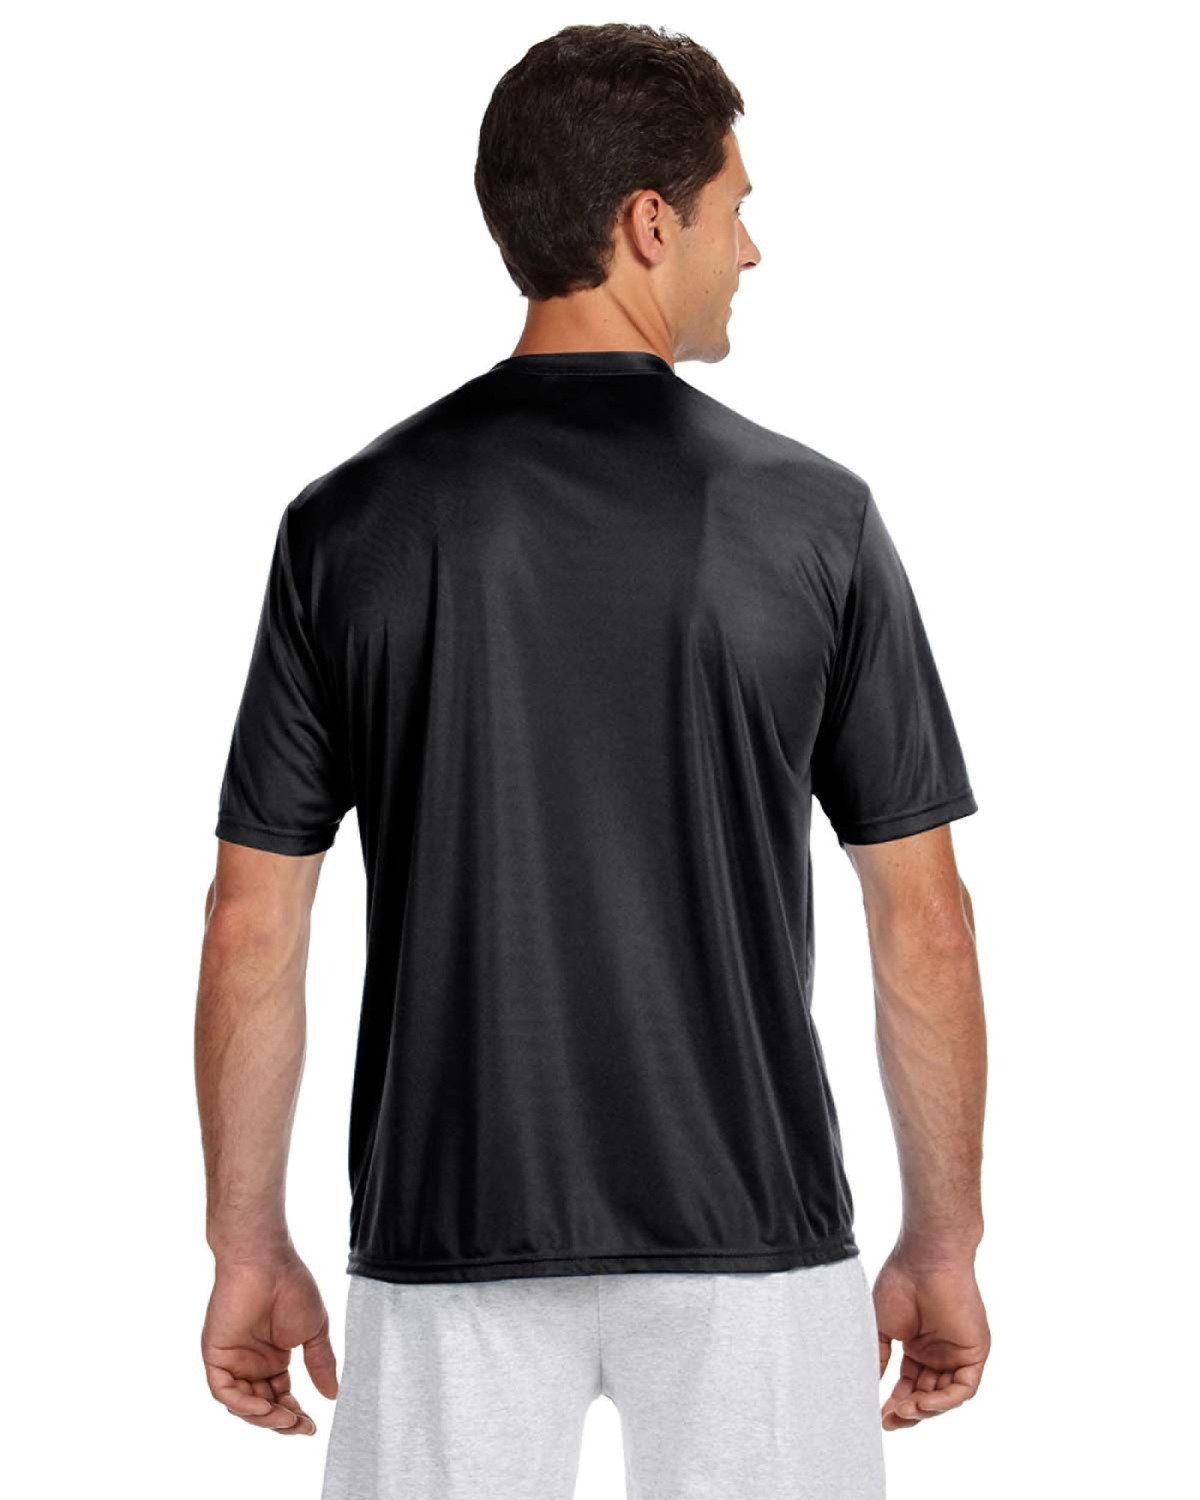 NEW A4 Men/'s Dri-Fit Workout Running Cooling Performance T-Shirt A4N3142